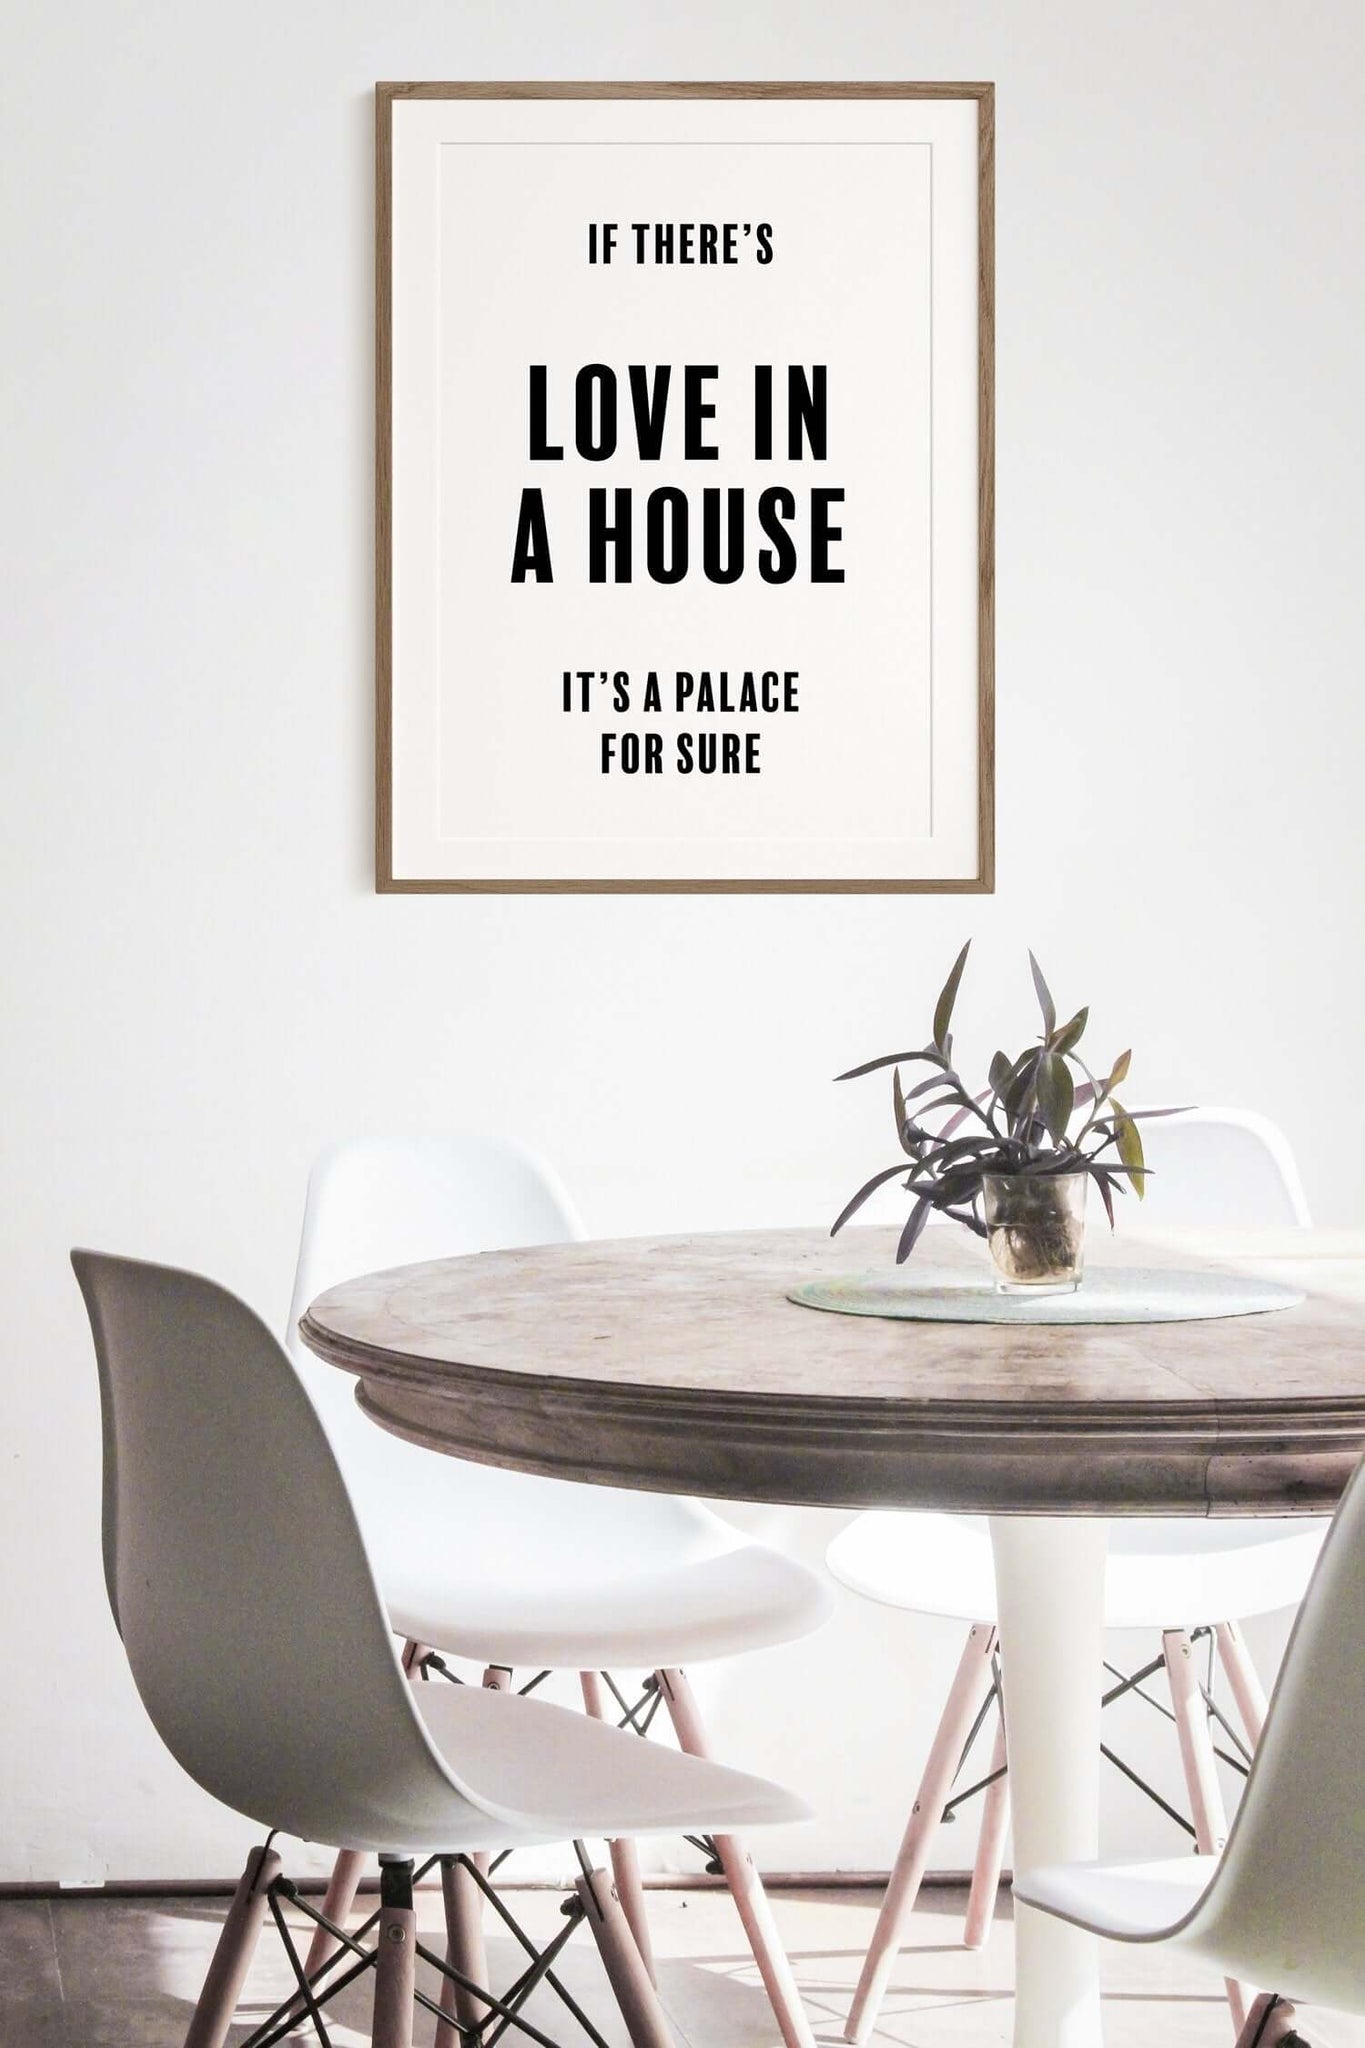 If There's Love in a House Wall Decor Print - Send Me a Dream